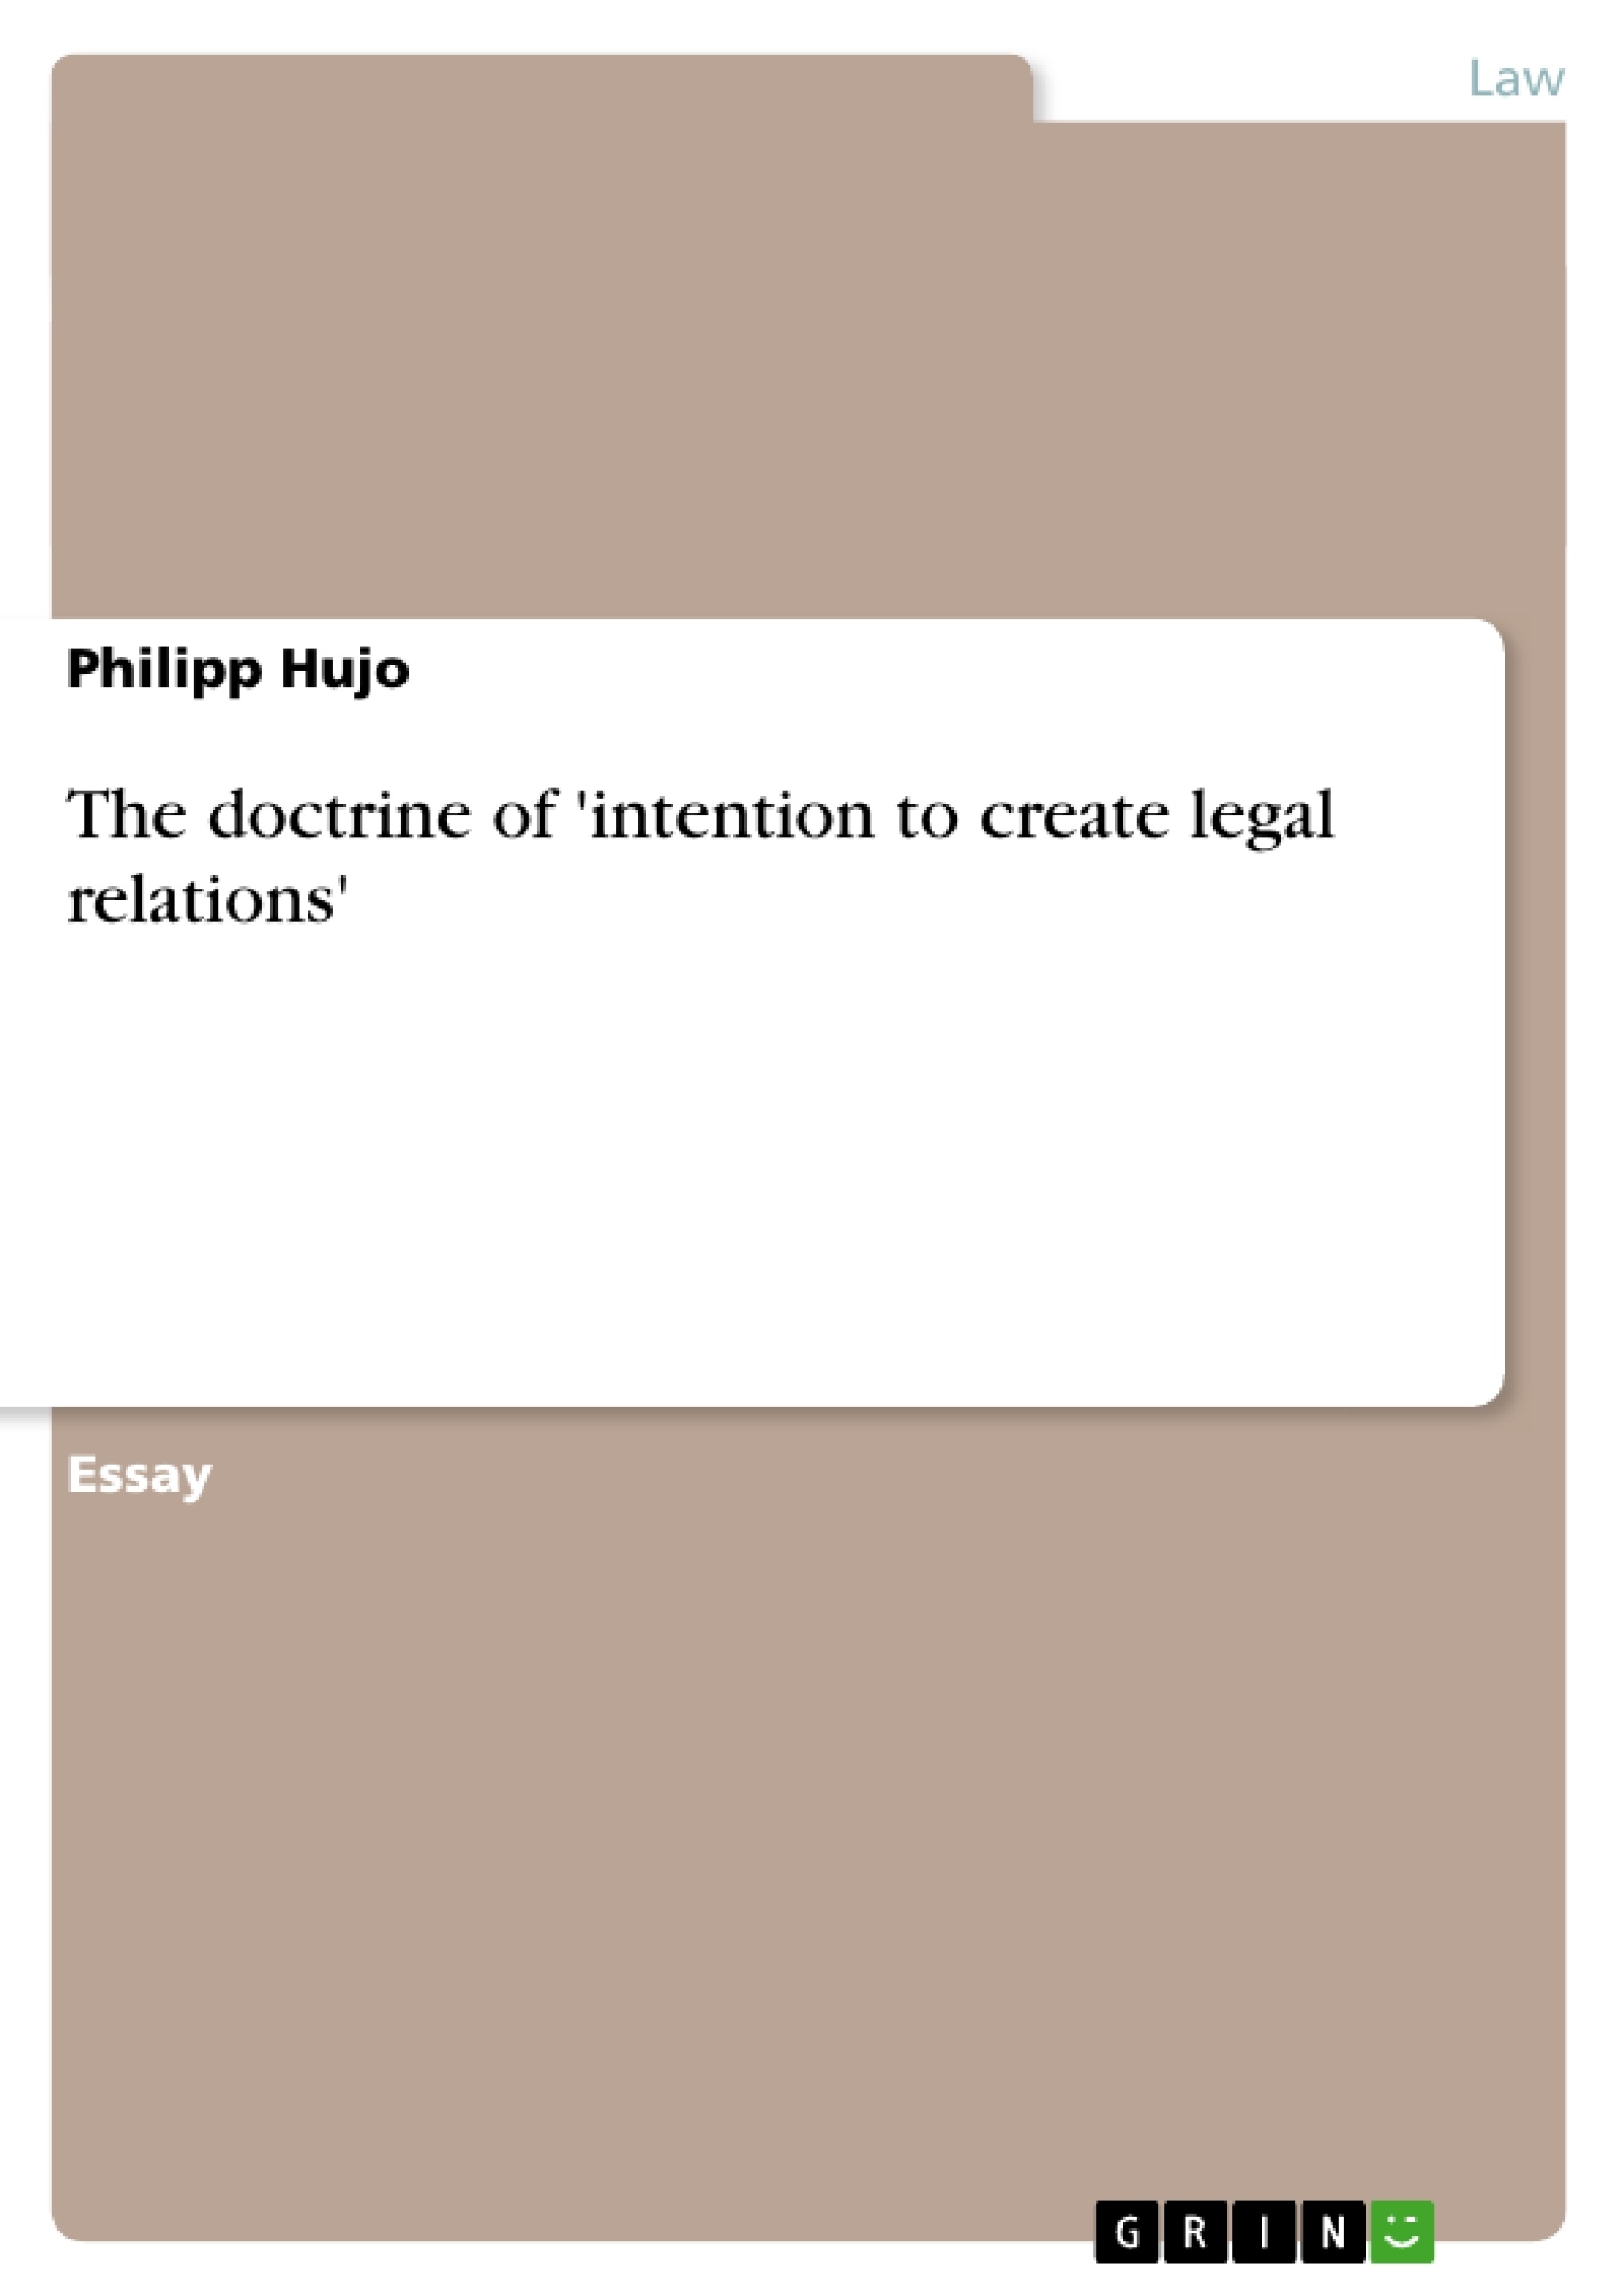 Title: The doctrine of 'intention to create legal relations'